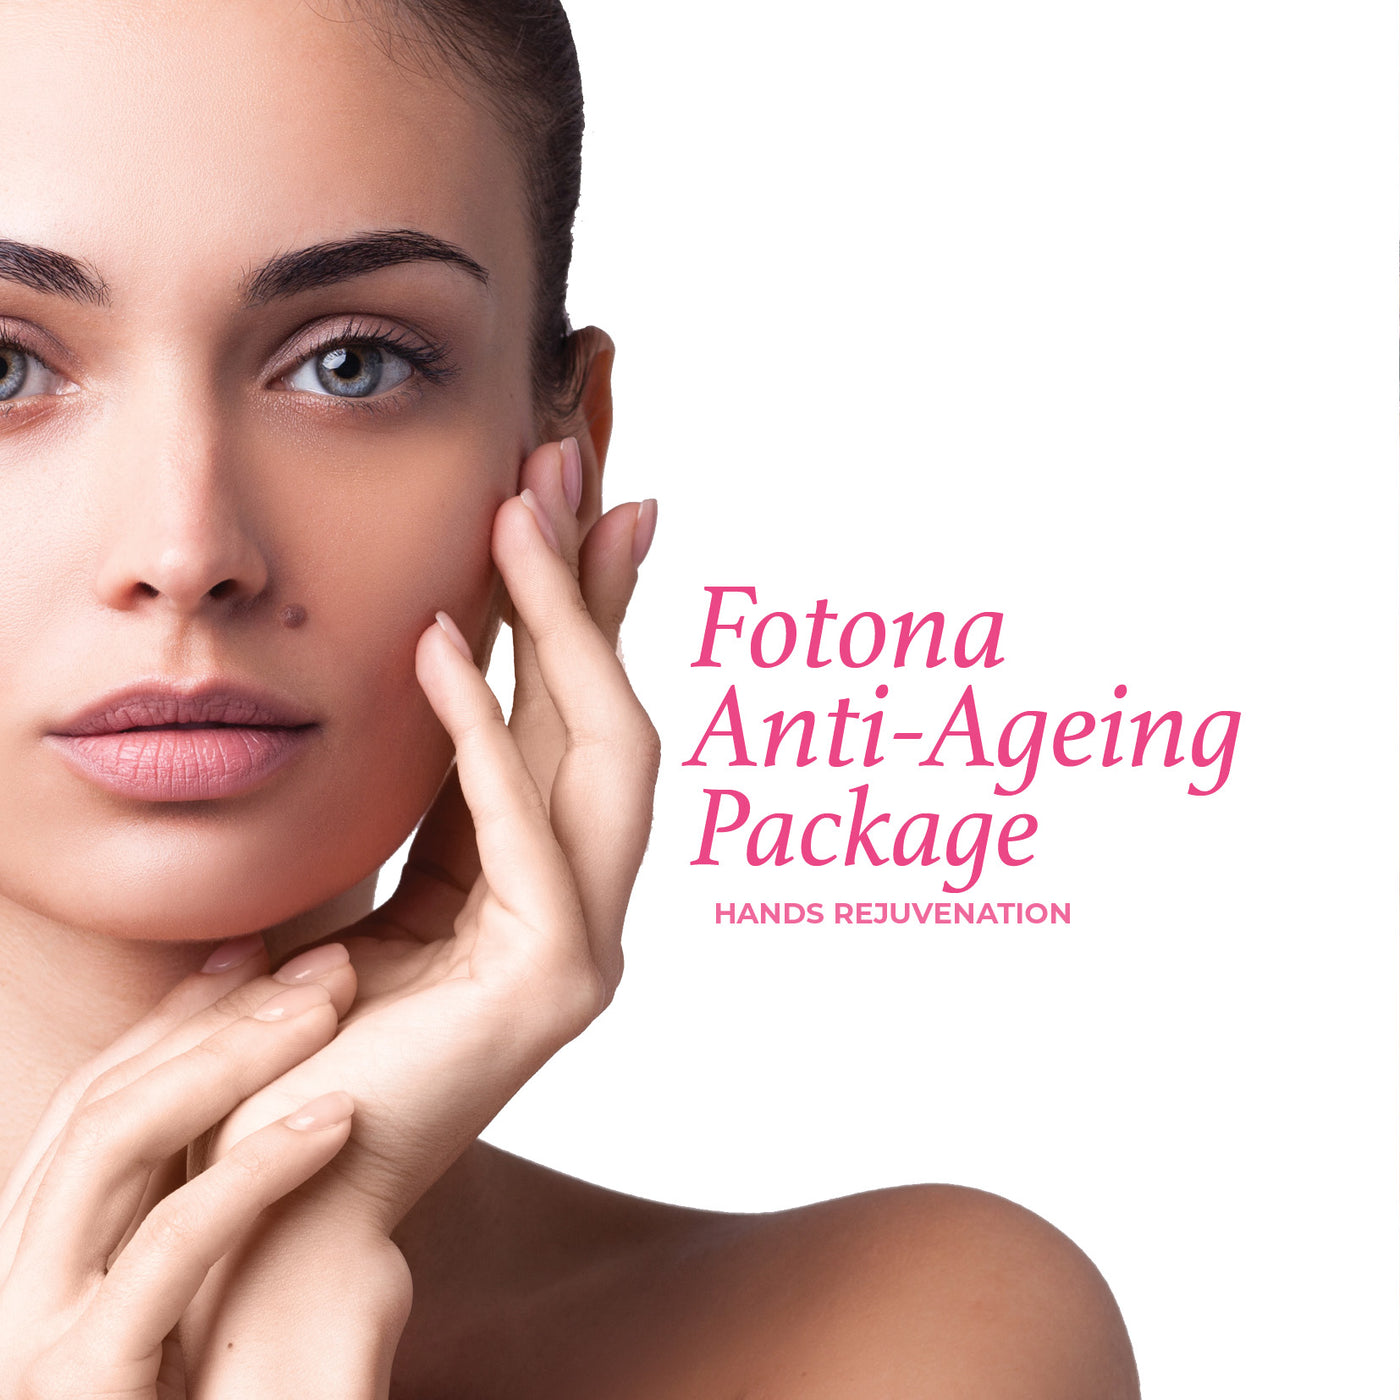 Anti-Ageing Package - Hands Rejuvenation